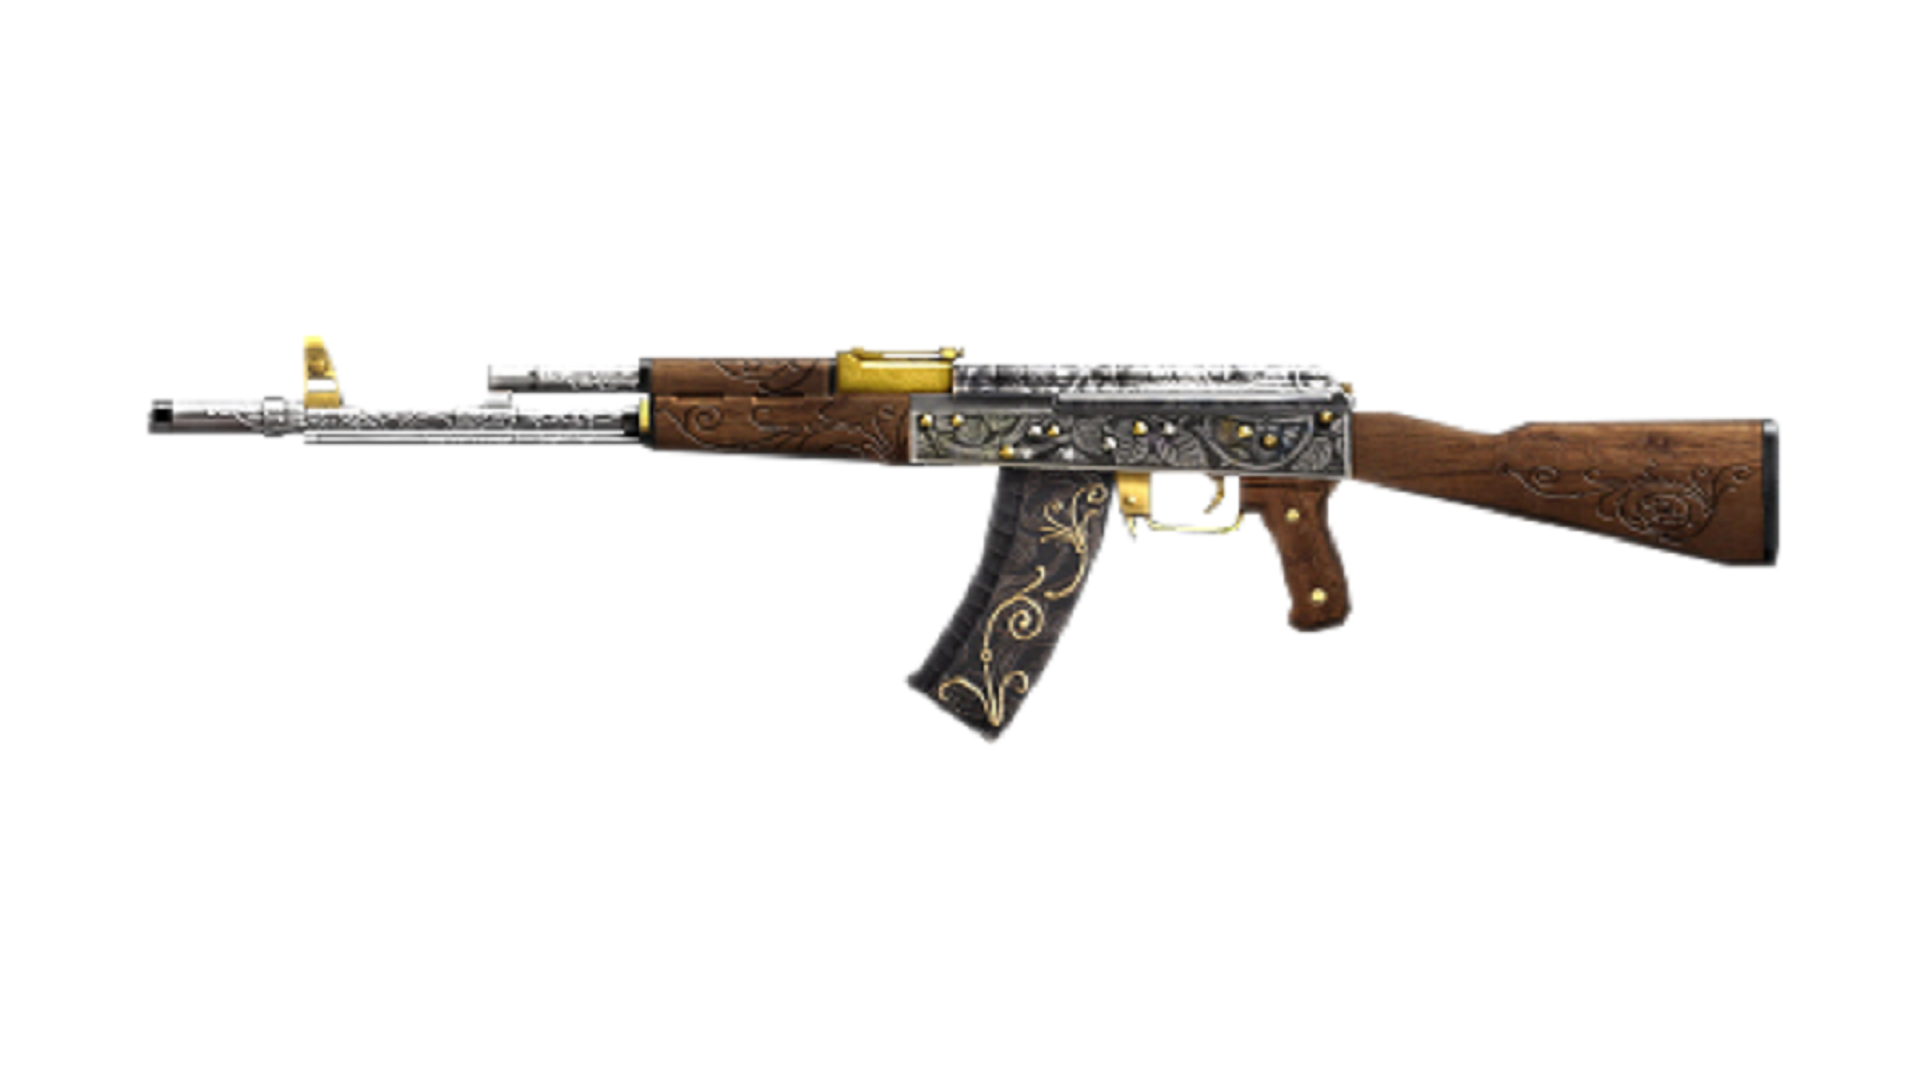 render_engraving_ak74_by_wagnermufc-d67p5vg.png